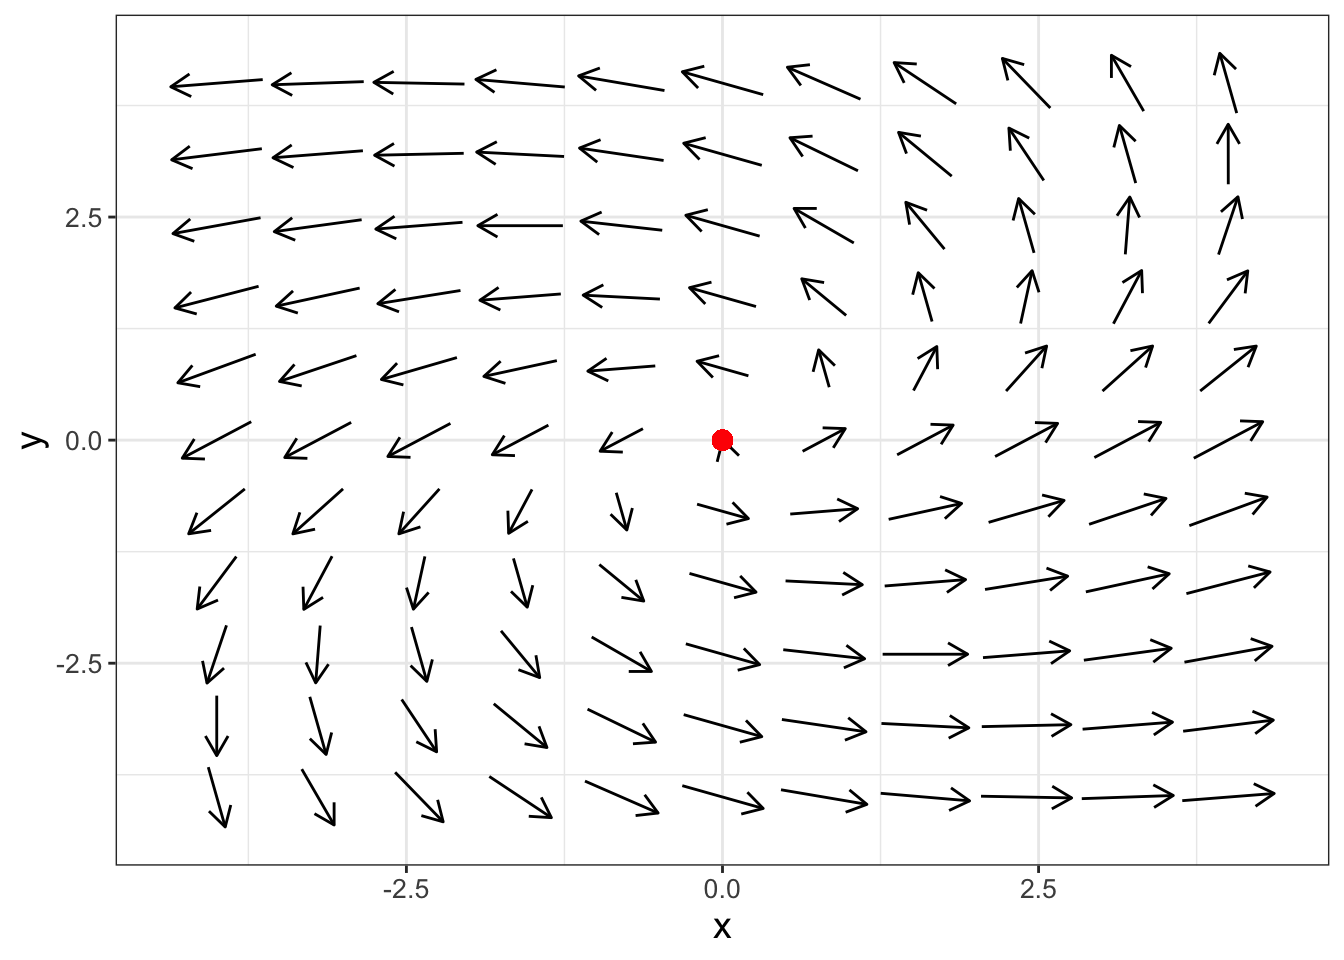 Phase plane for Equation \@ref(eq:spiral-source-ex-18), which shows the equilibrium solution is a spiral source.